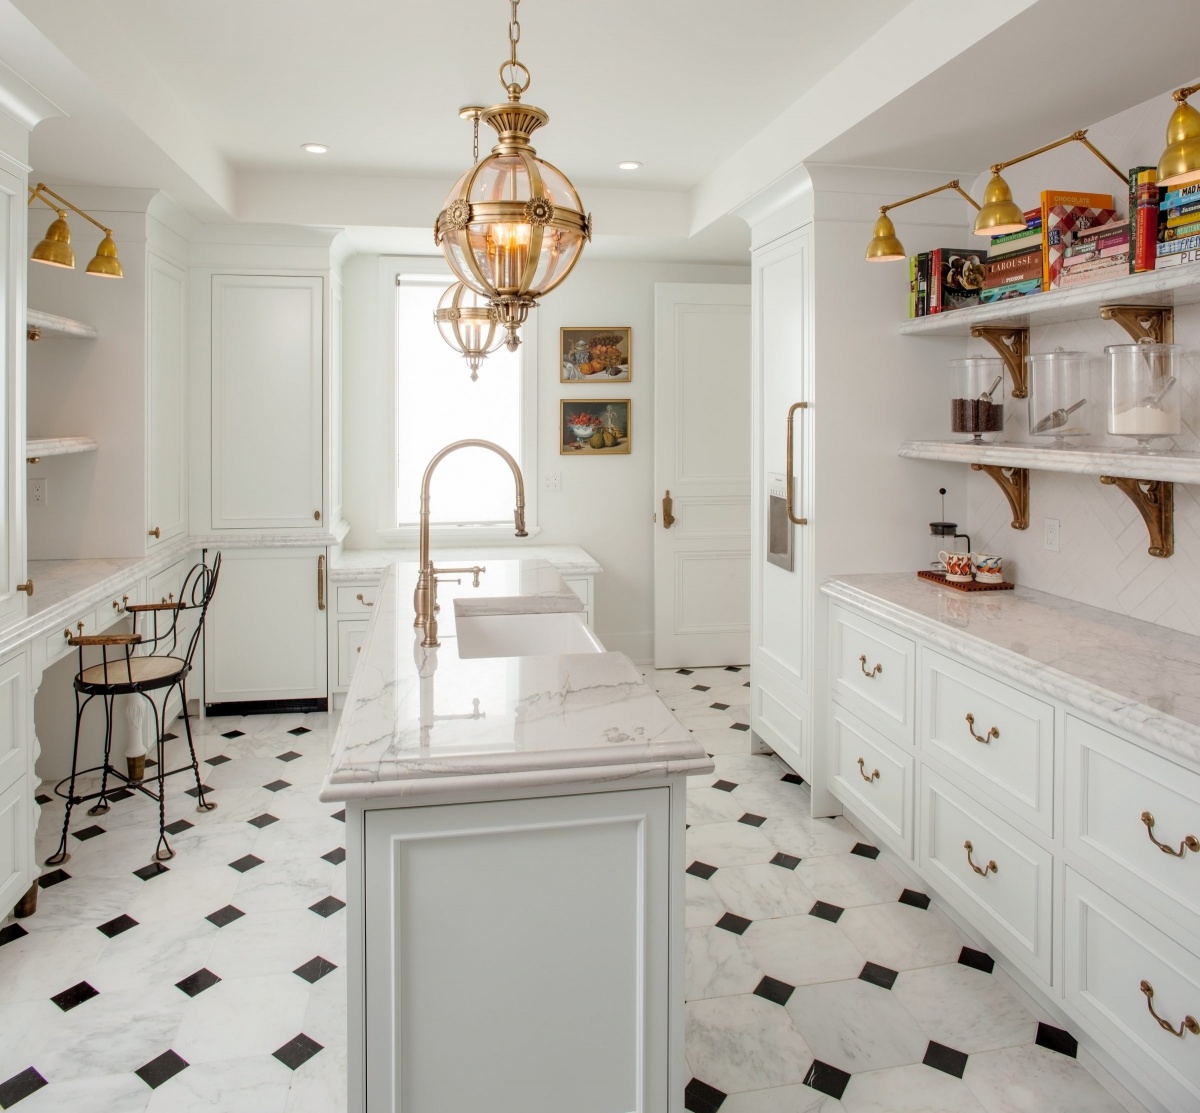 Elevate Your Style With These Kitchen Floor Tile Ideas   The ...